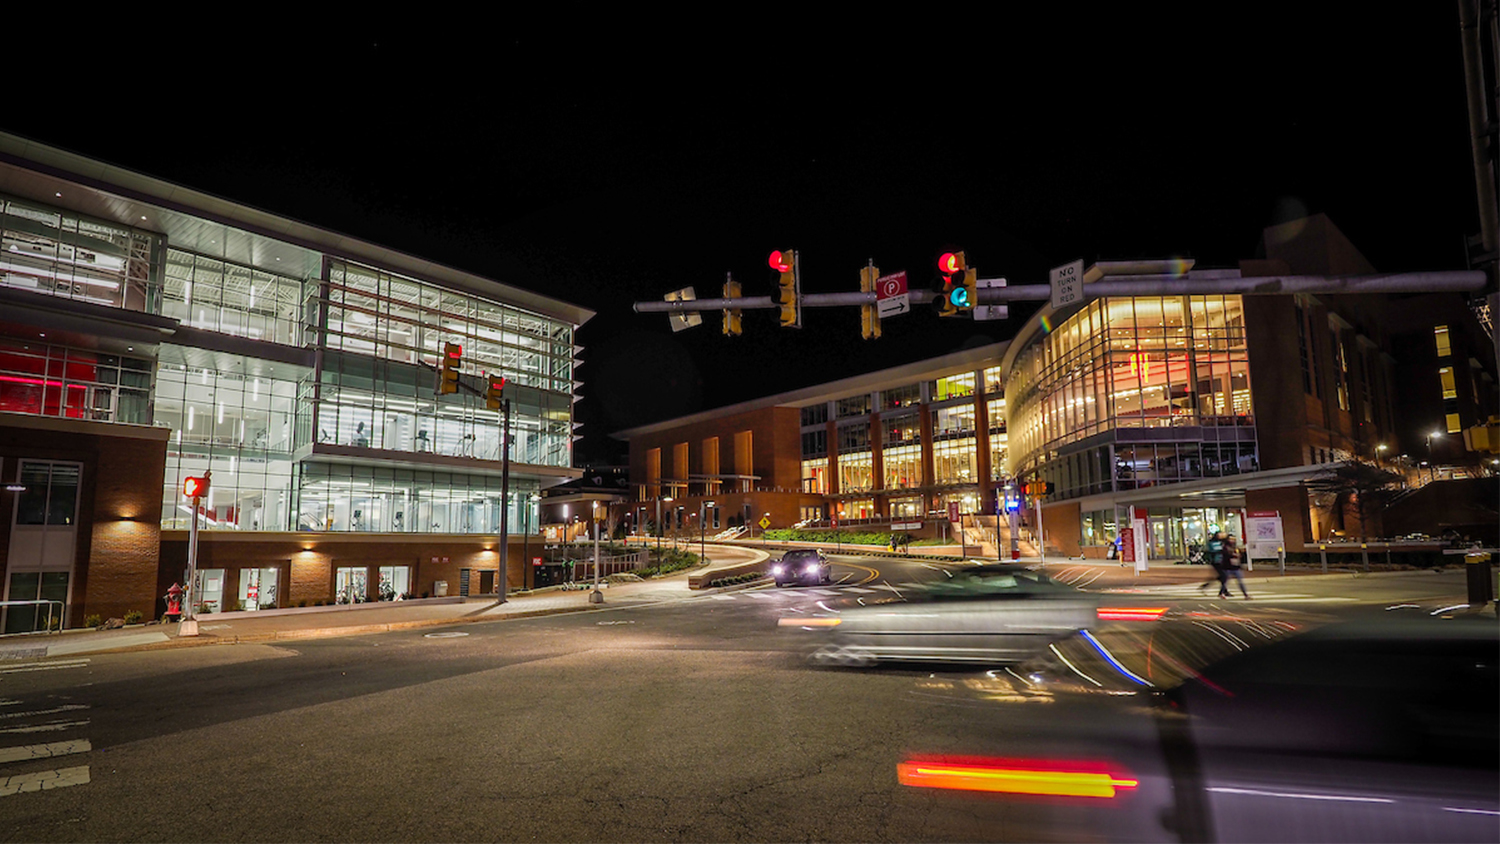 Talley Student Union and the Wellness and Recreation Center at night